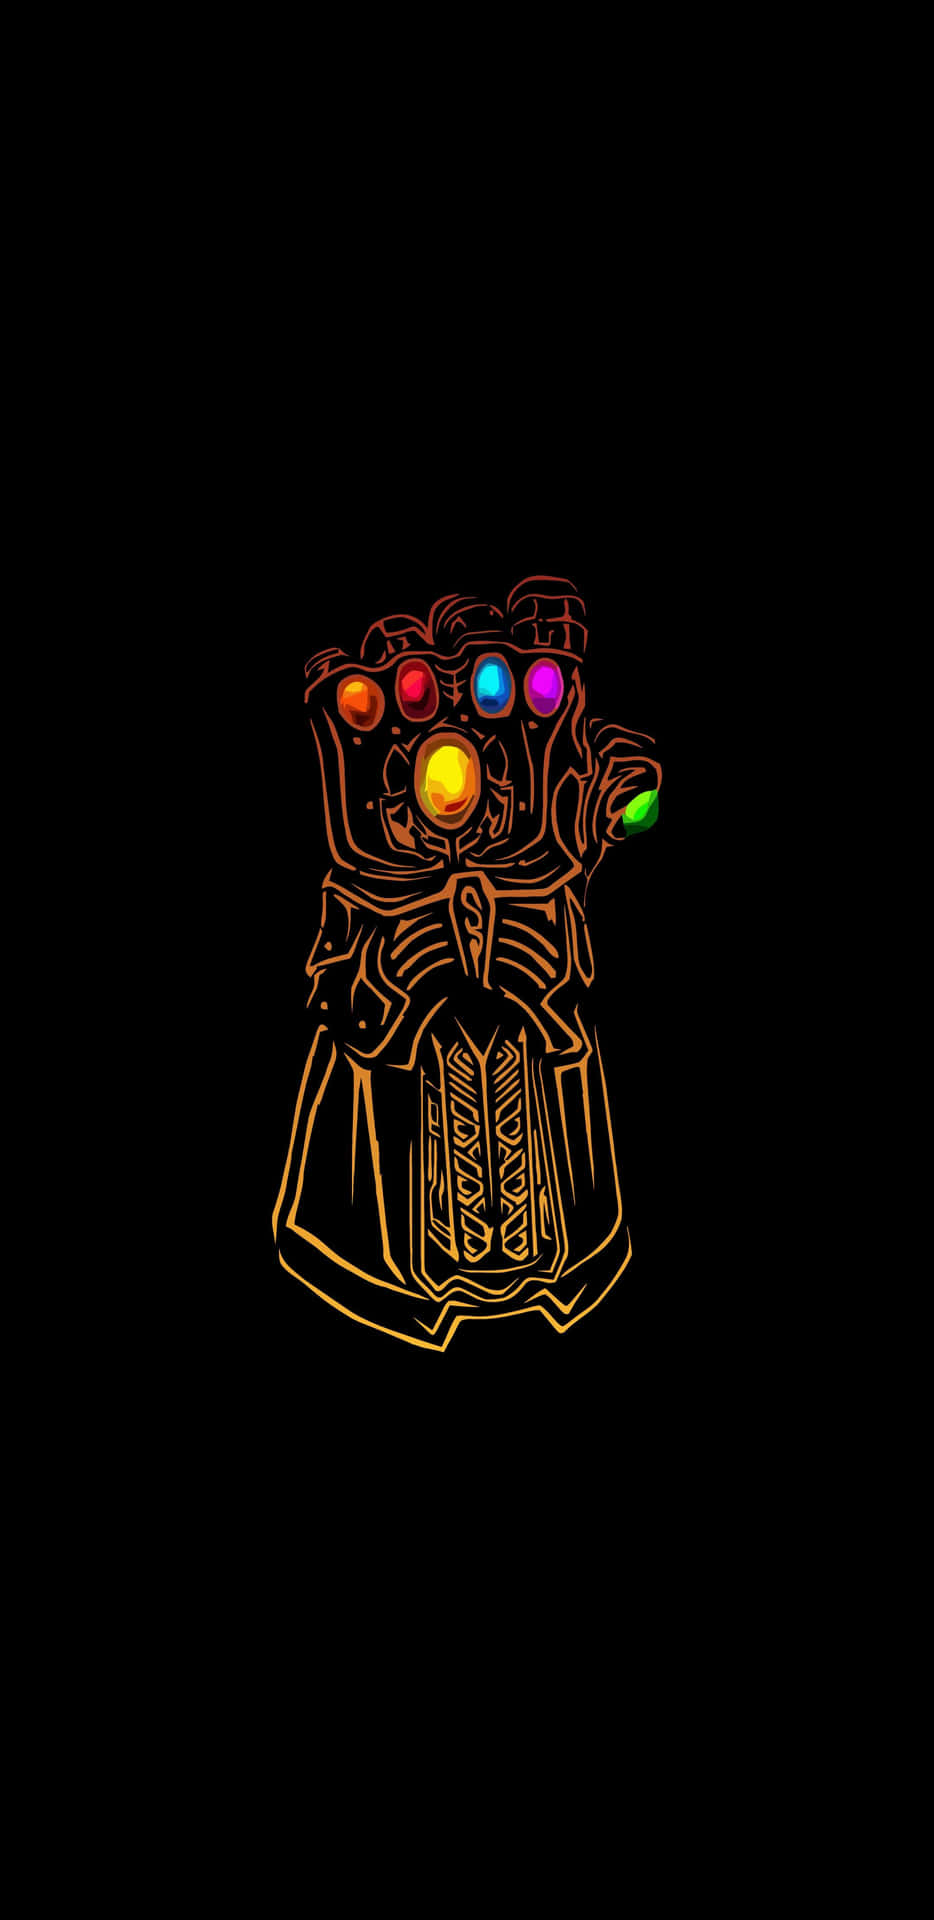 The Power of Infinity Gems Unleashed Wallpaper